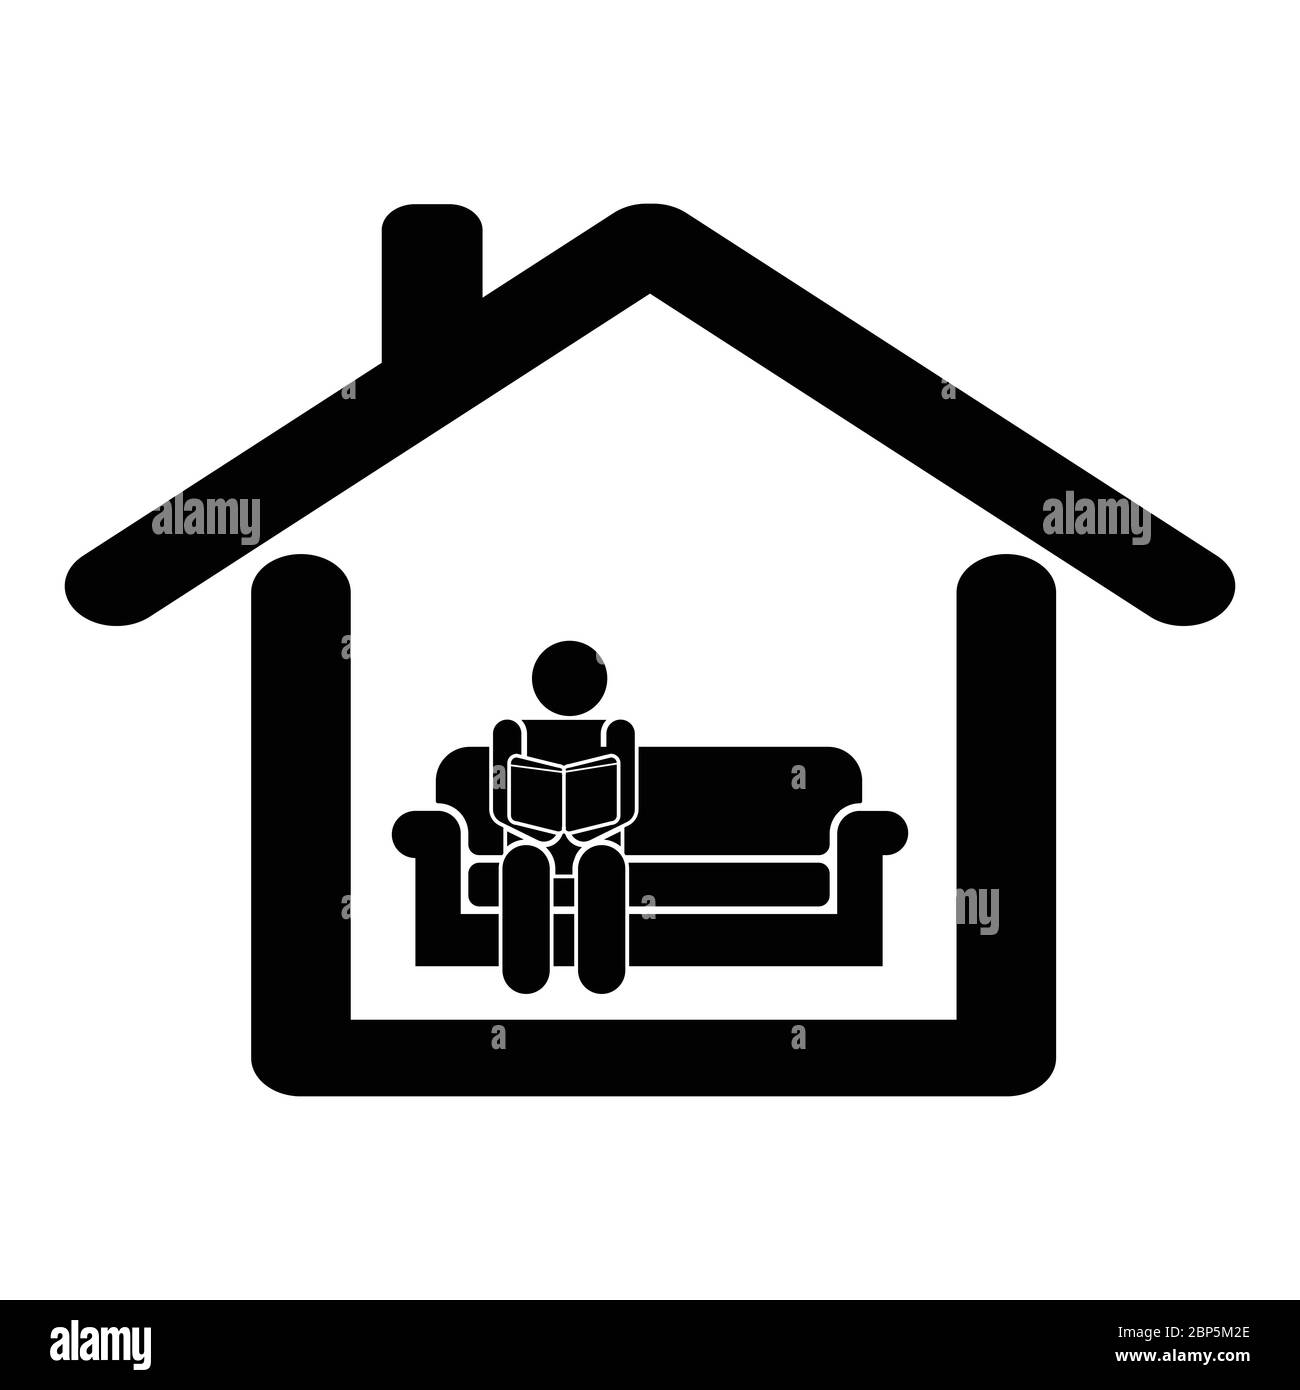 Read at Home Quarantine. Pictogram depicting man sitting on sofa couch at home reading a book. Black and white EPS Vector Stock Vector